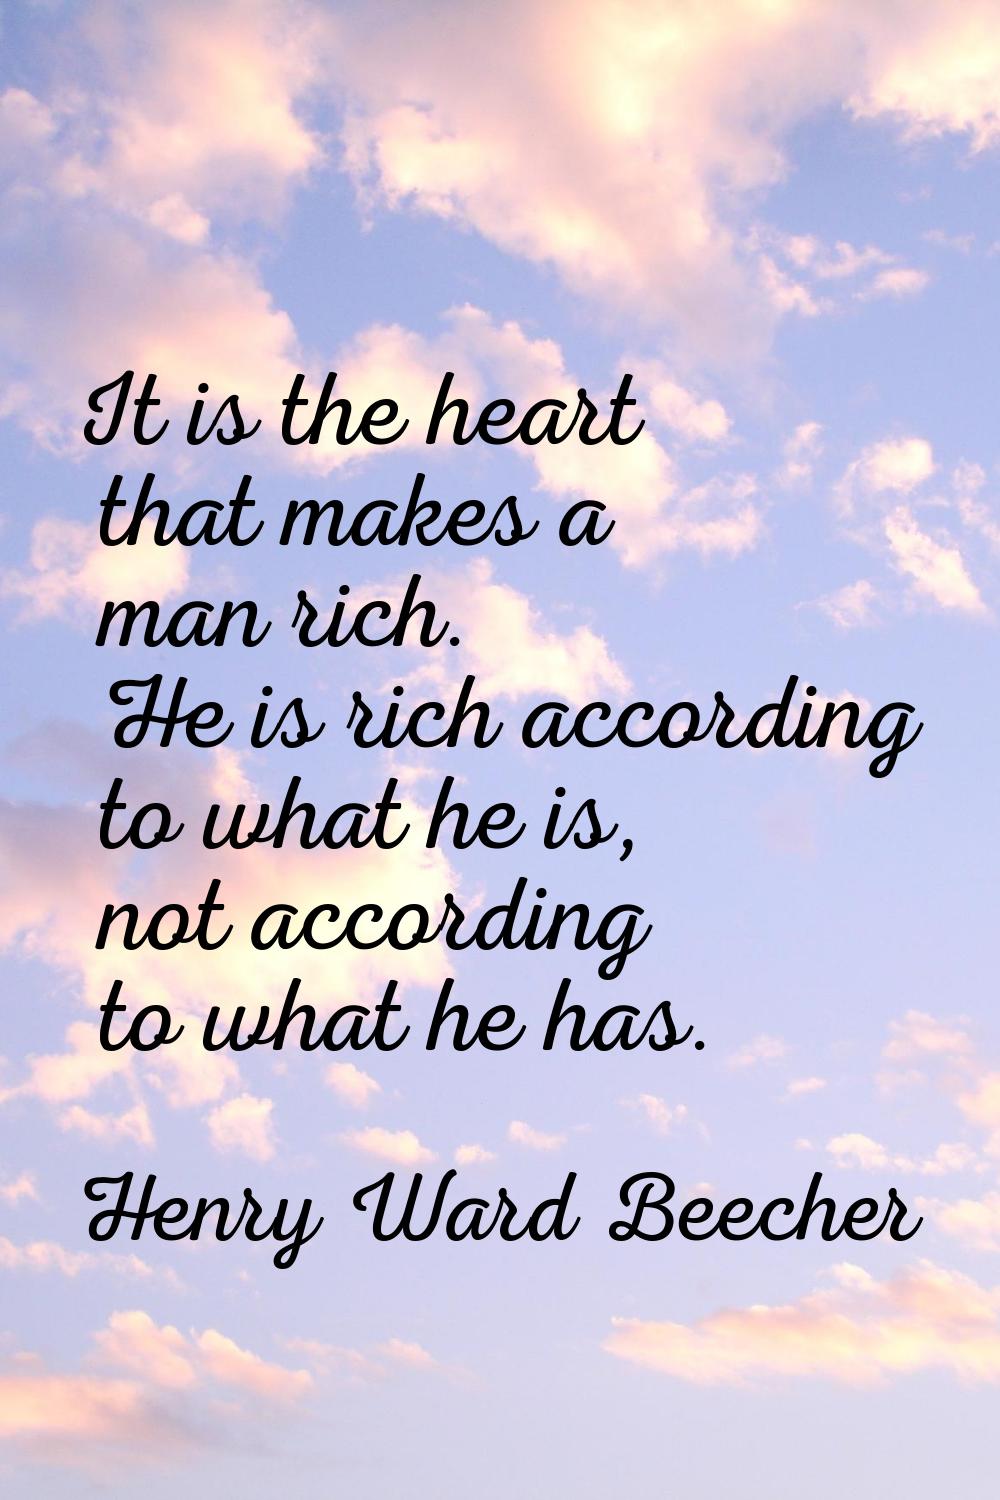 It is the heart that makes a man rich. He is rich according to what he is, not according to what he